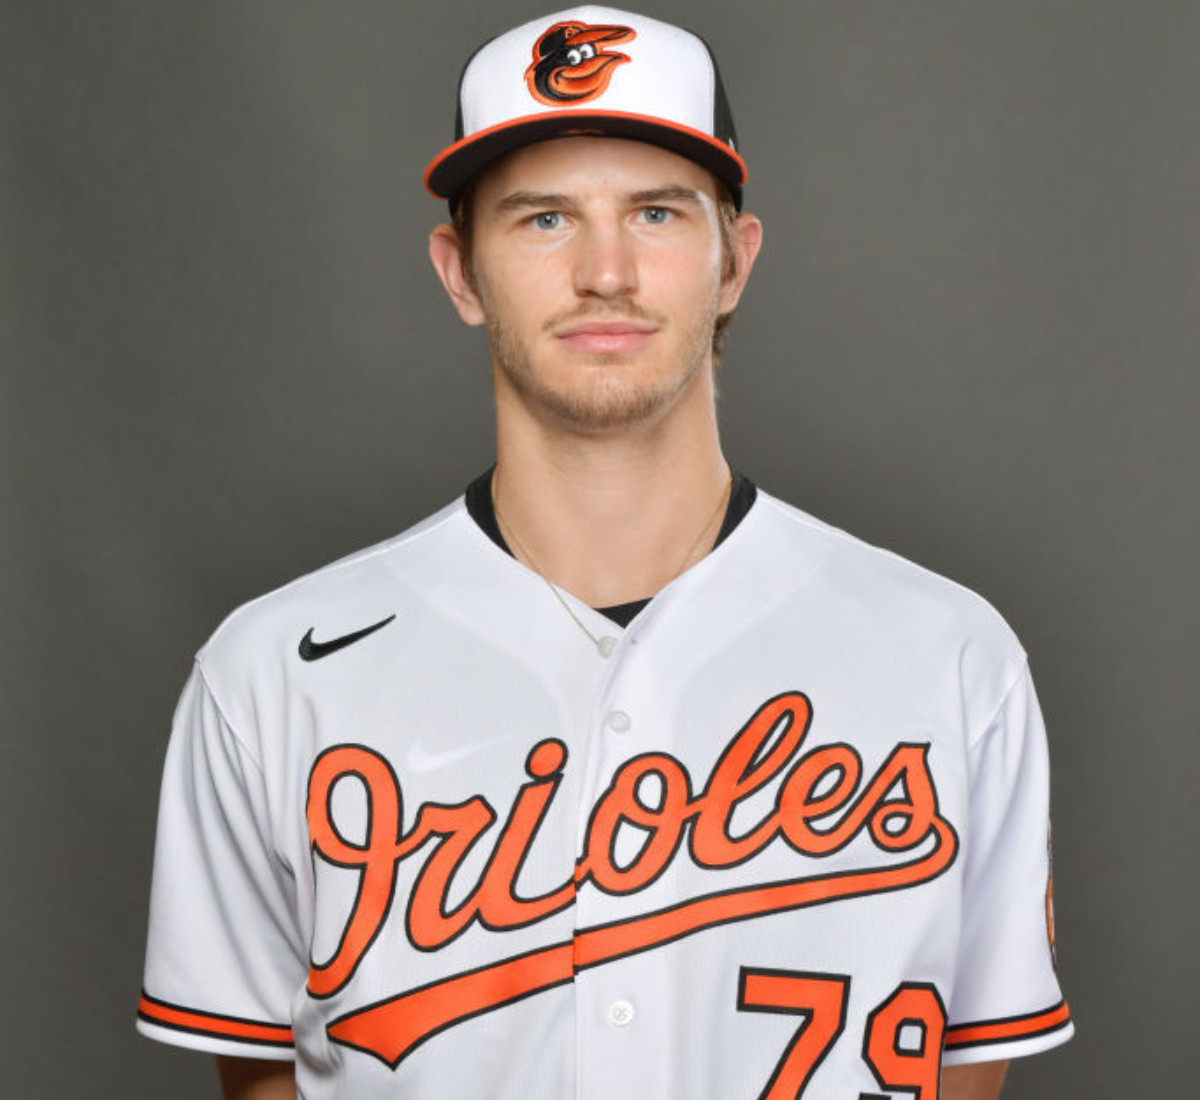 Martin Cervenka #79 of the Baltimore Orioles poses on 2019. GETTY IMAGES